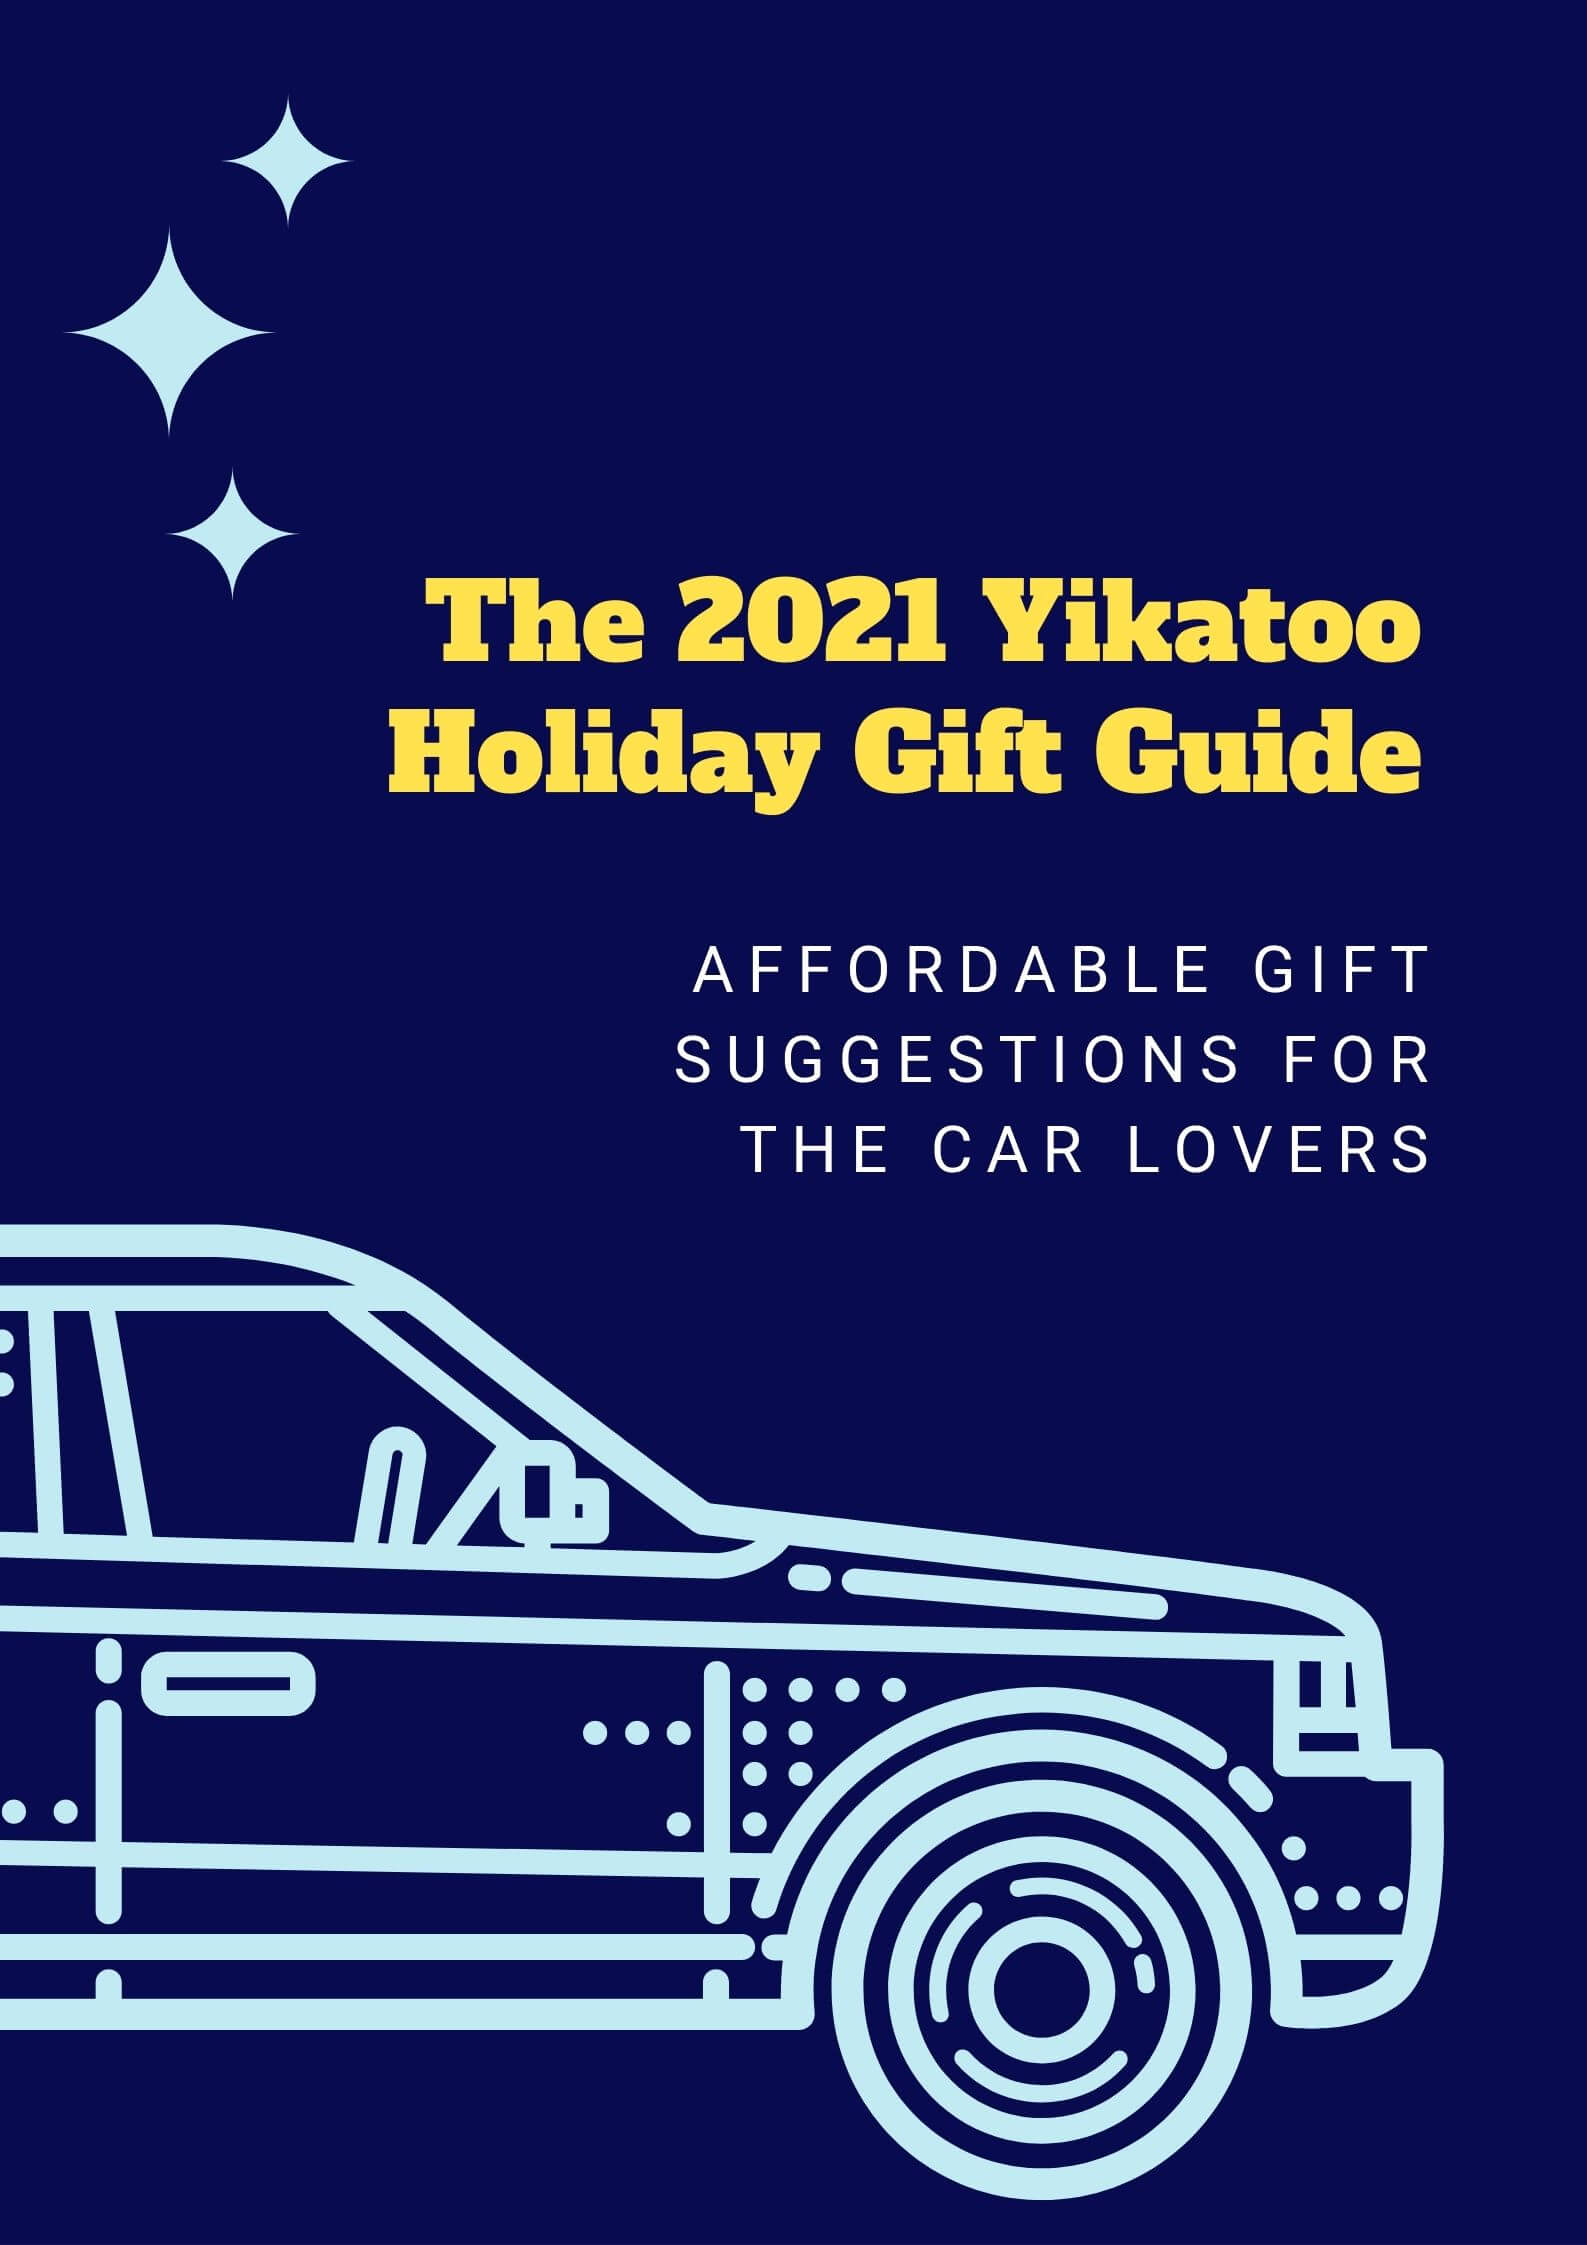 The 2021 Yikatoo Holiday Gift Guide: Affordable Gift Suggestions For The Car Lovers